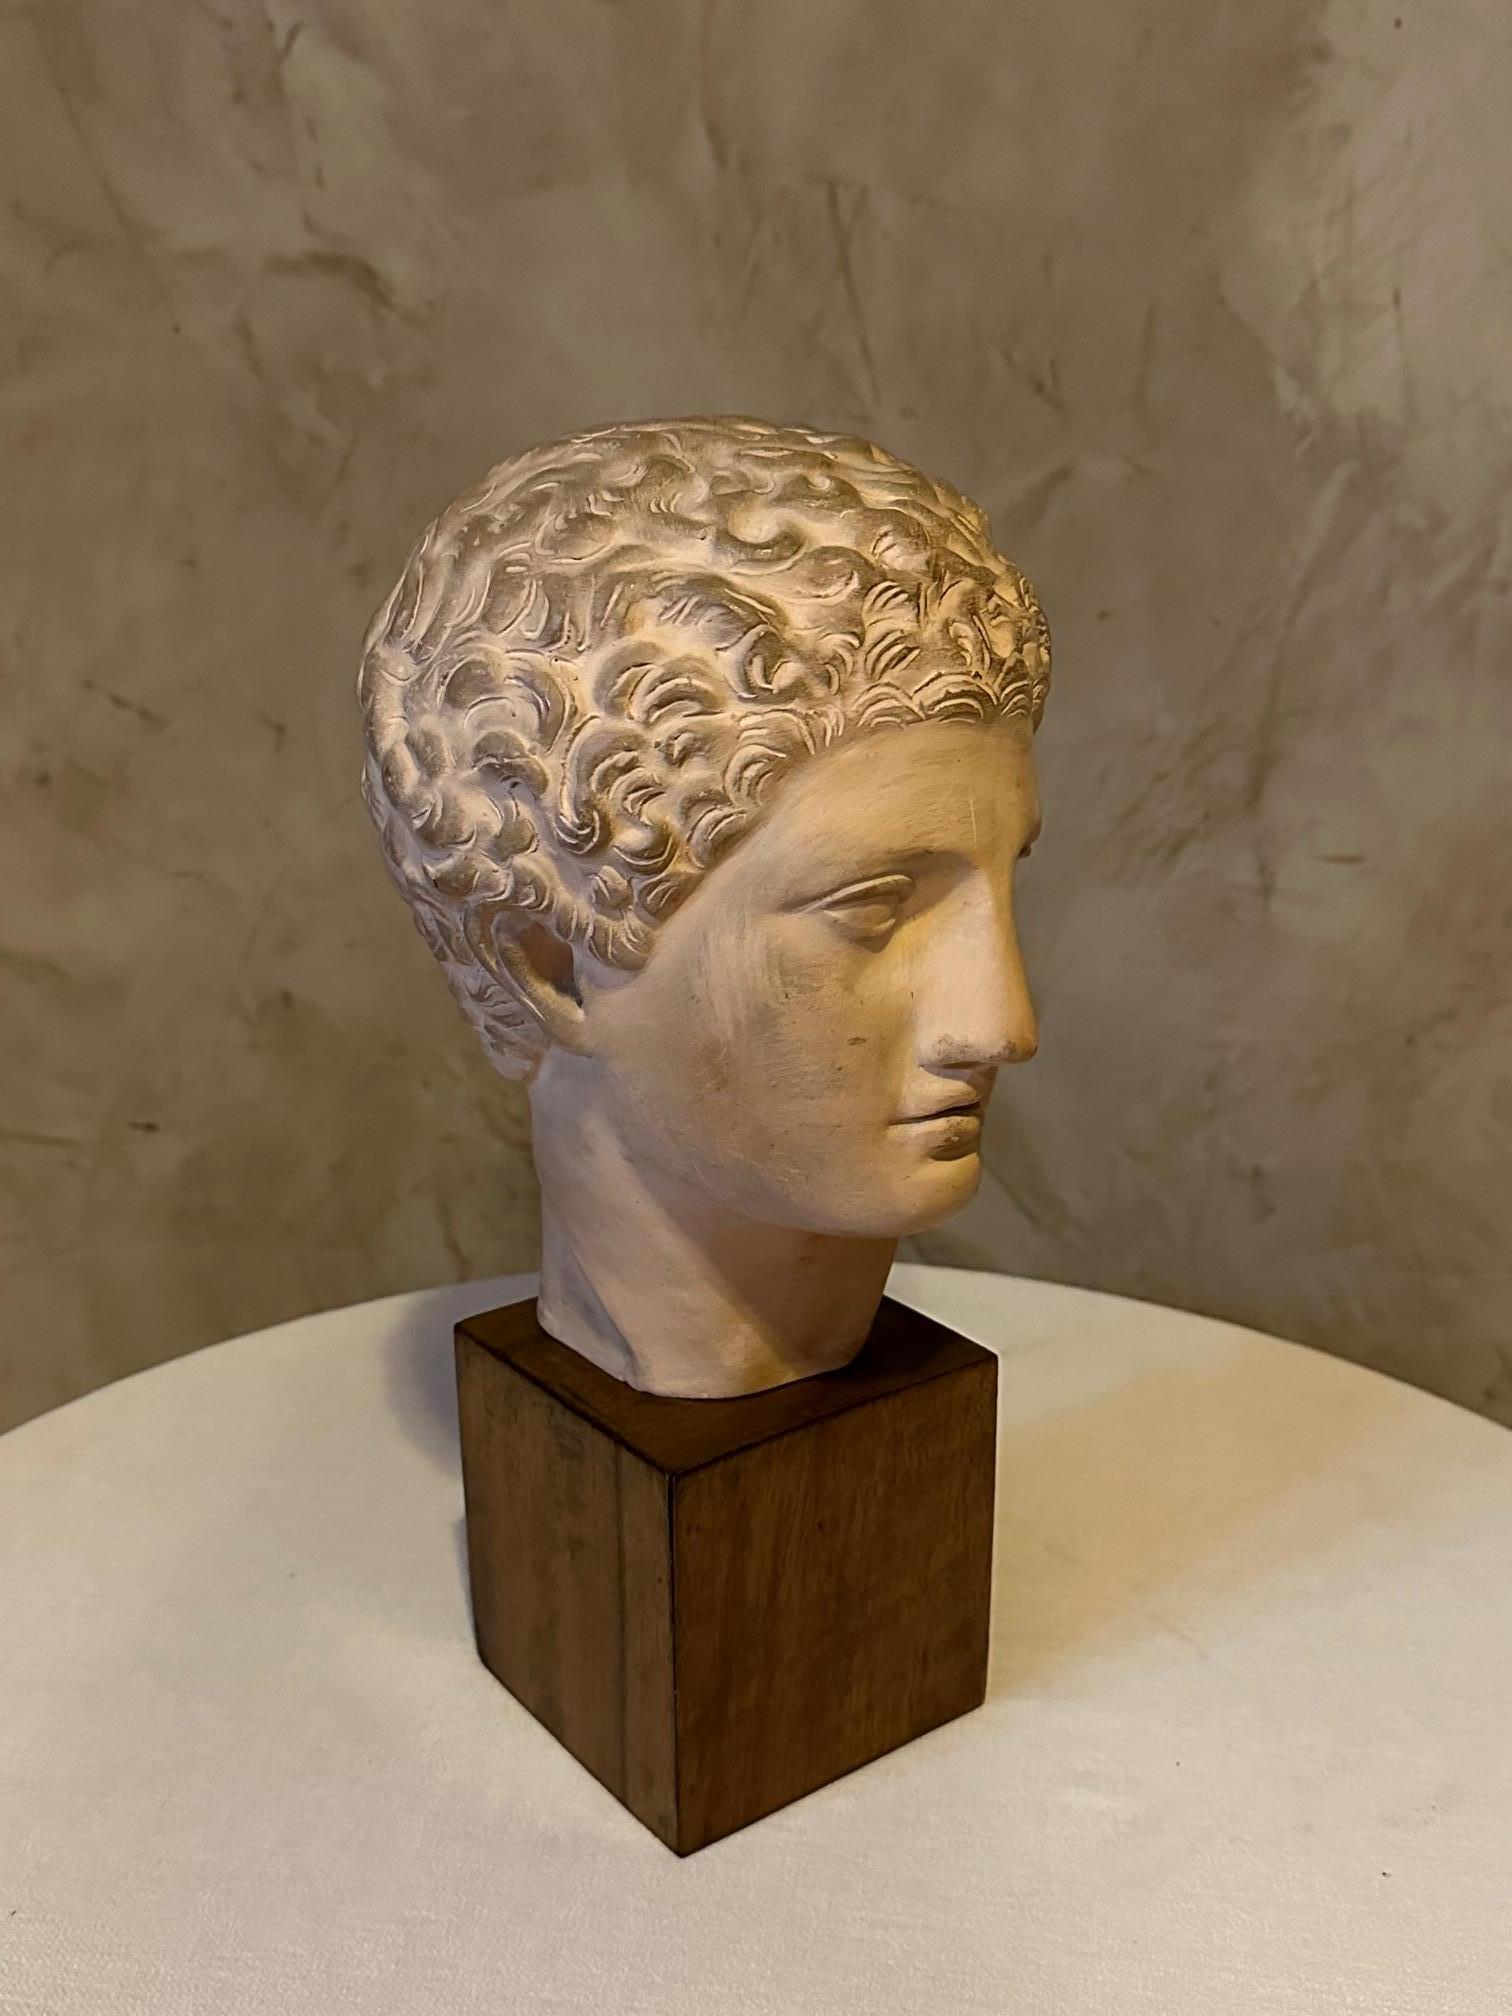 Greek head of a man in plaster on wooden base dating from the 1950s in very good condition.
Ideal for decoration in a bibliotheque or on a column.